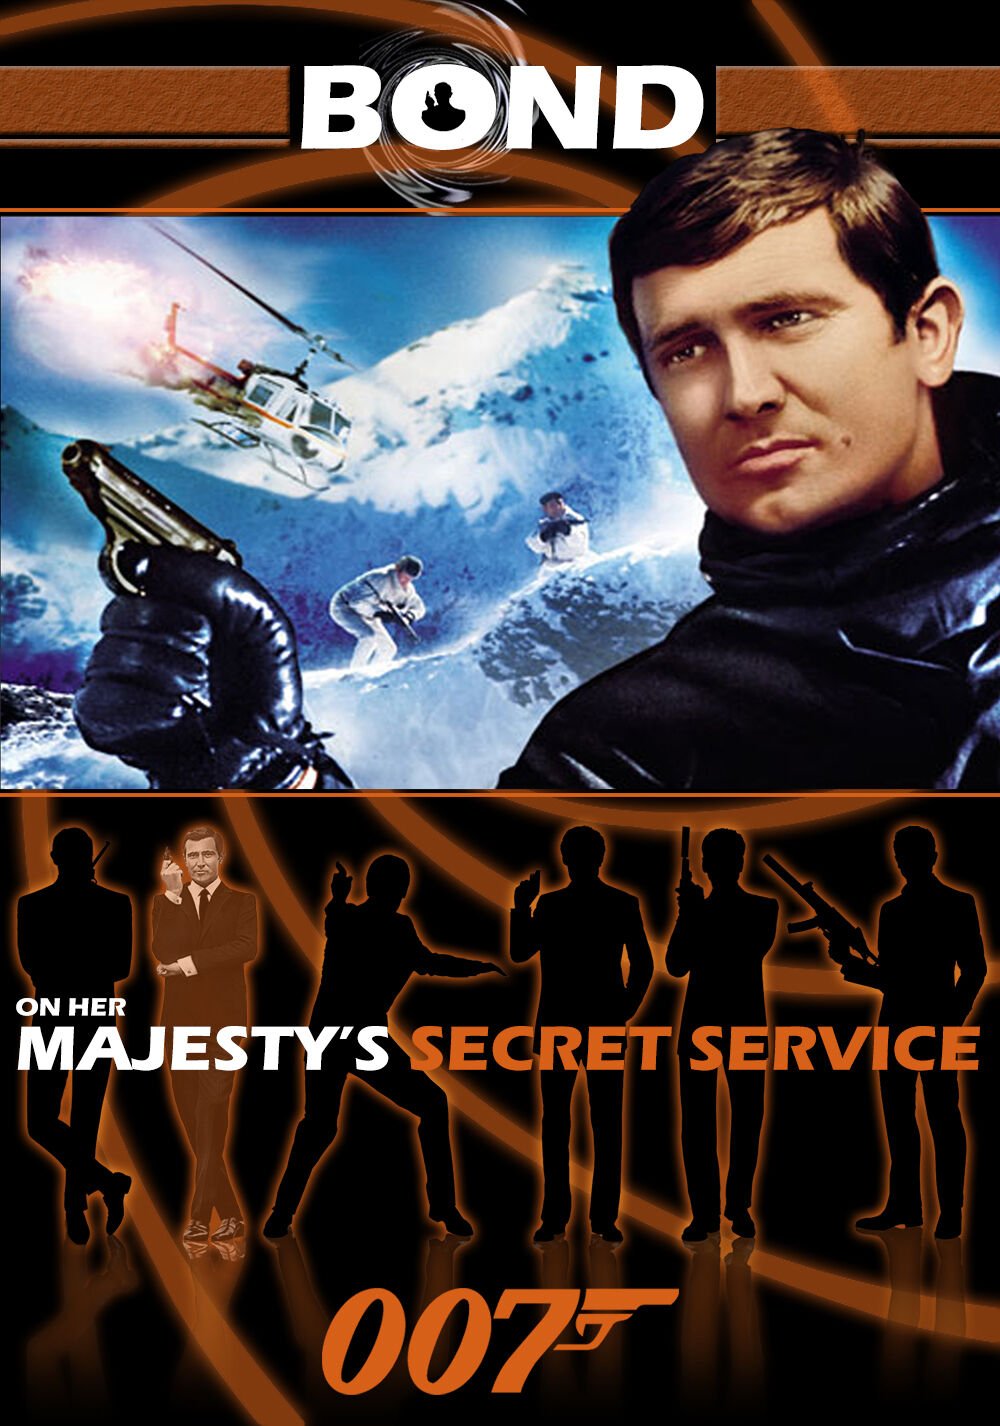 On Her Majesty's Secret Service Style G Movie Poster 13x19 inches